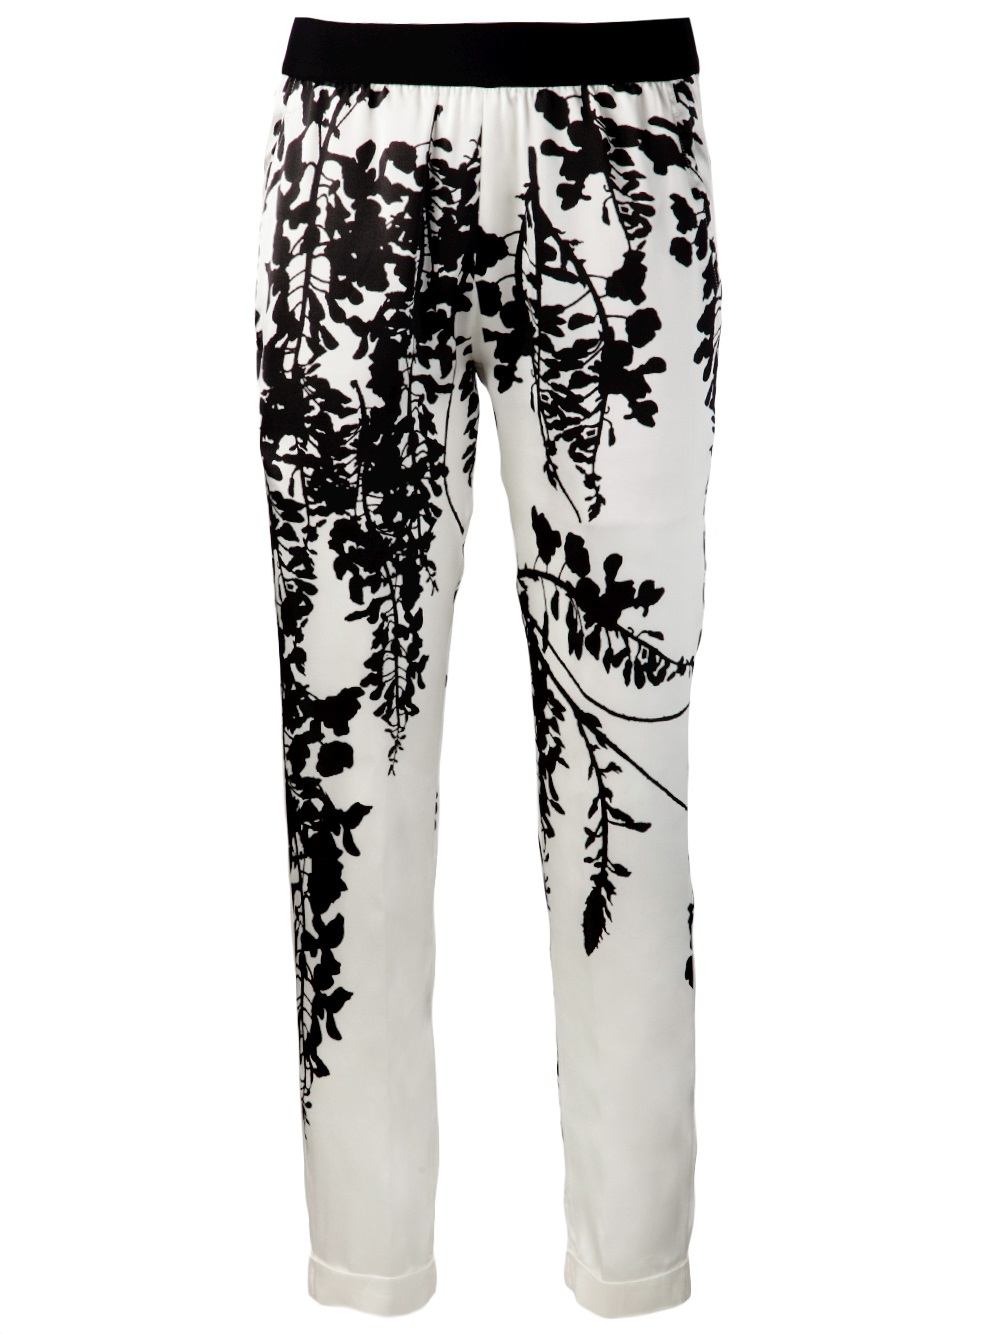 Lyst - Ann Demeulemeester Silhouette Trousers in White